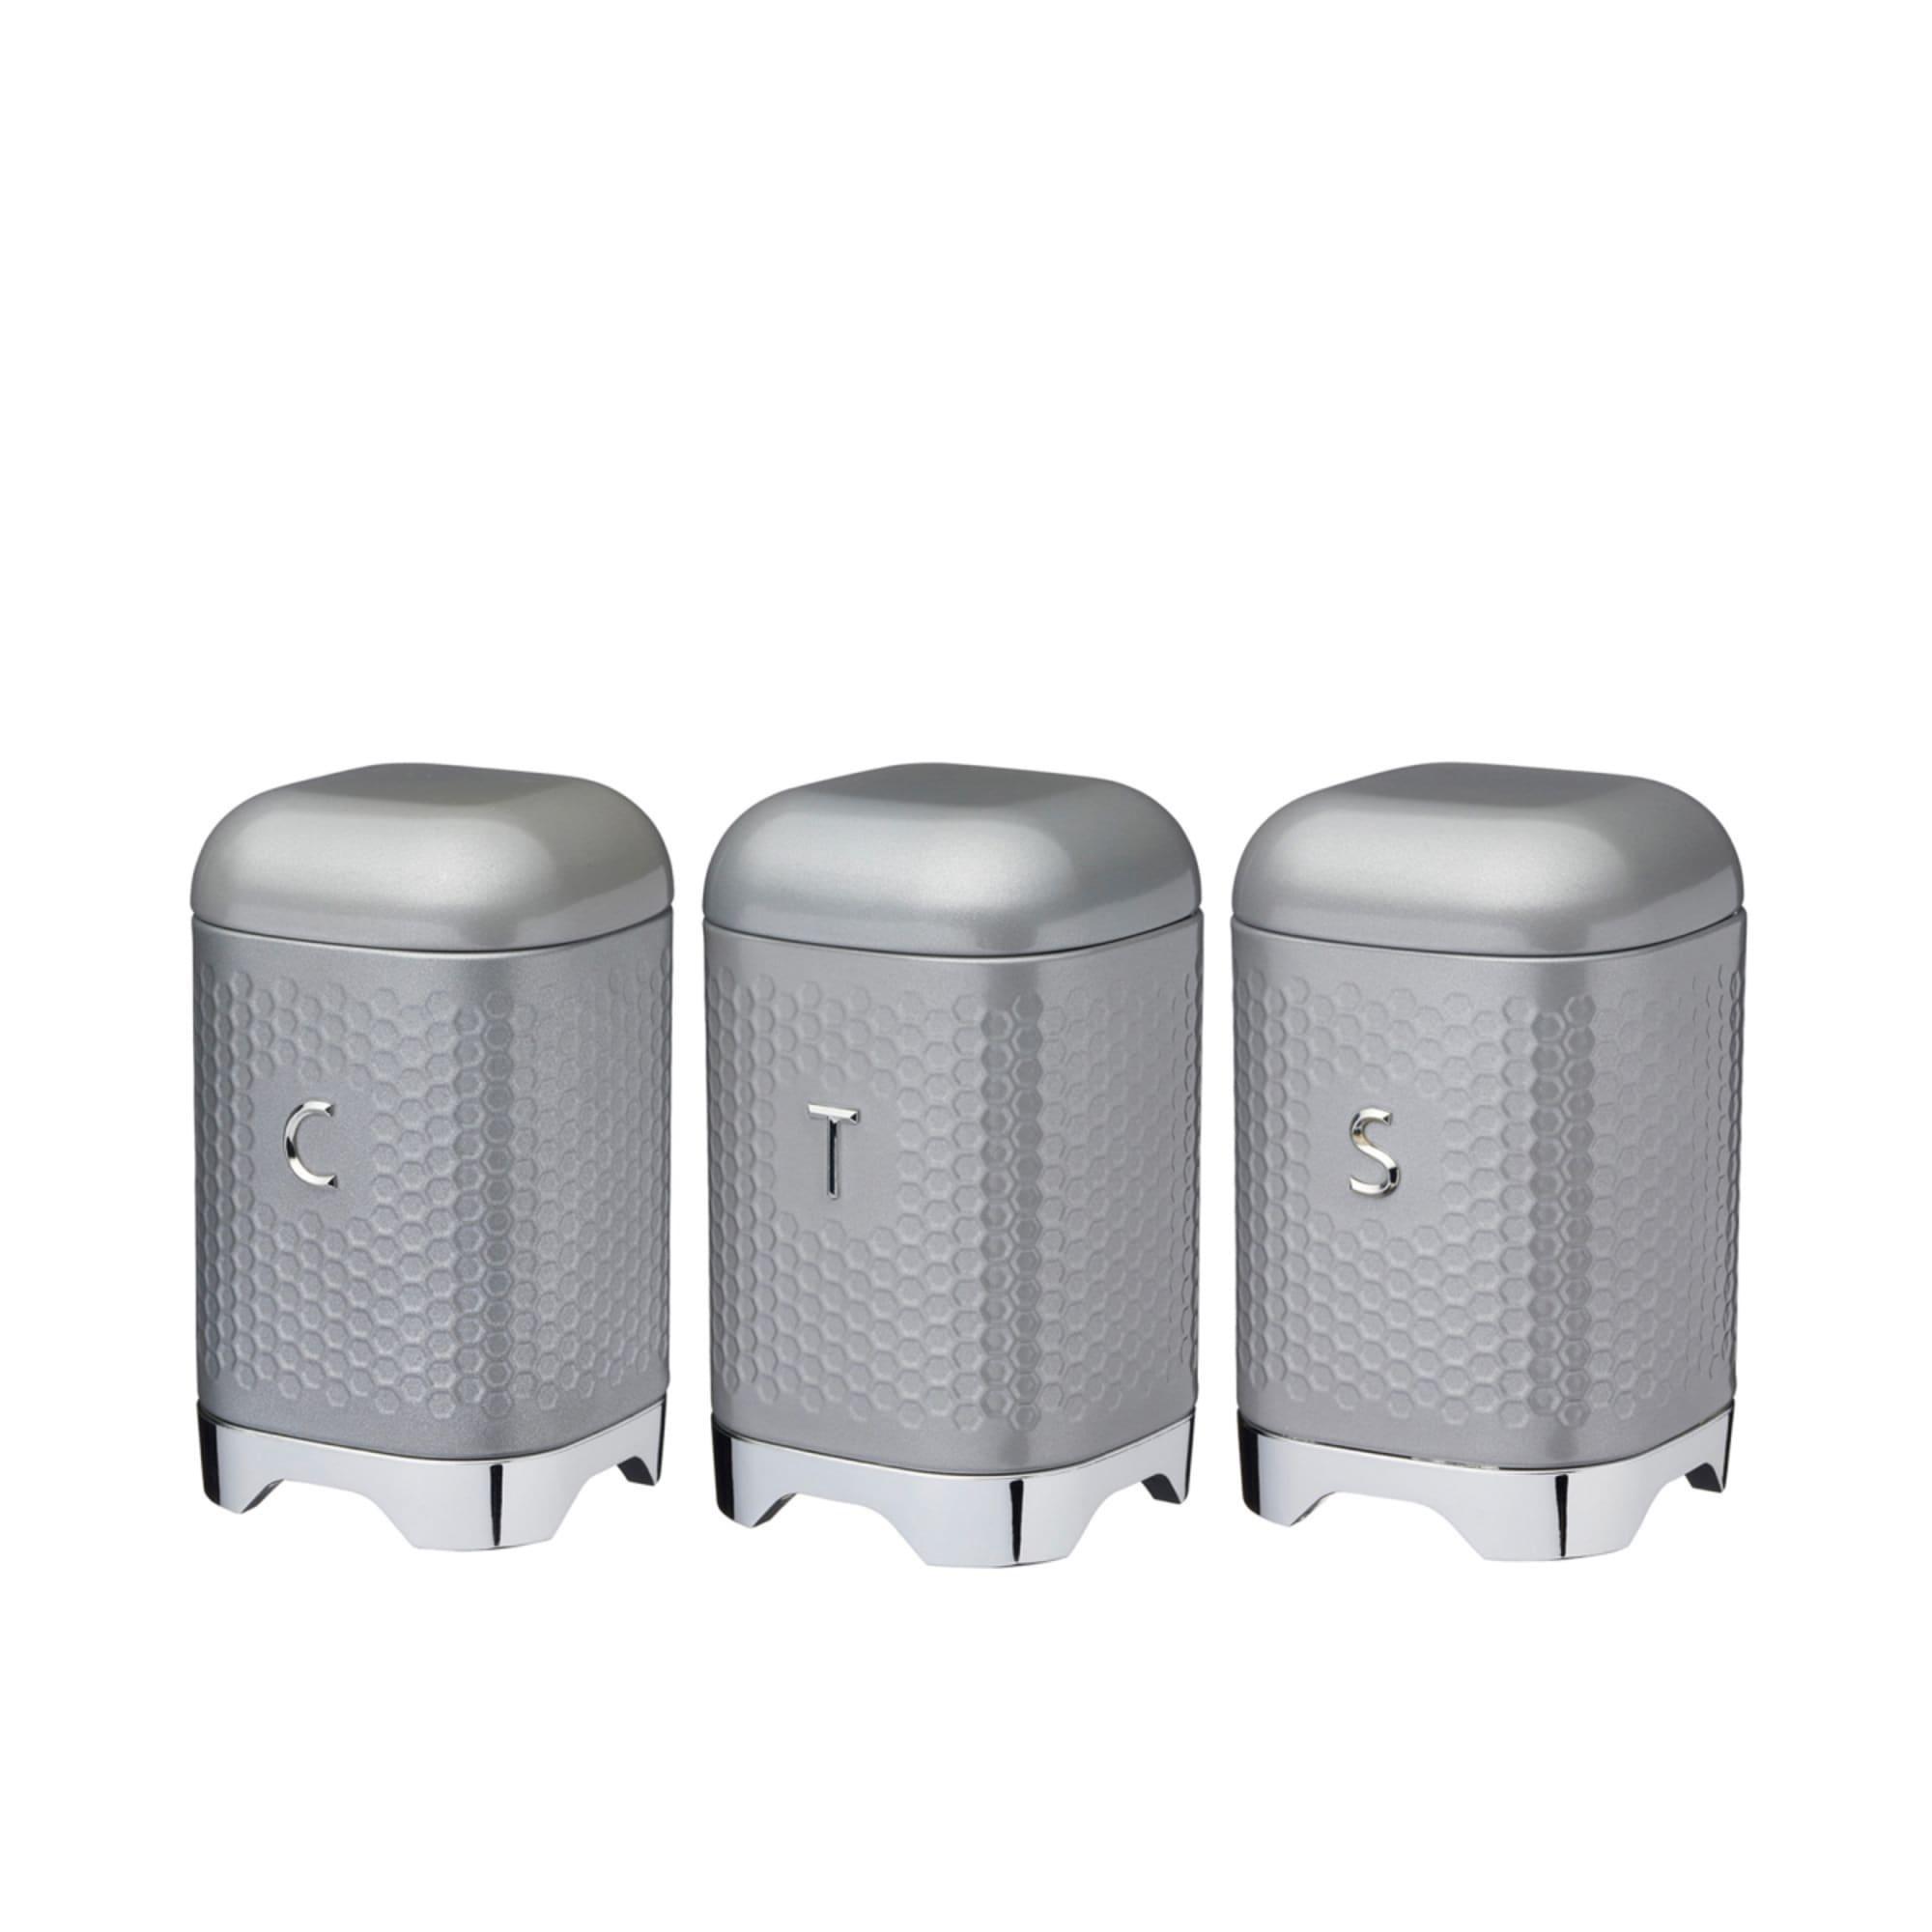 Kitchen Craft Lovello Canister Set of 3 Grey Image 3